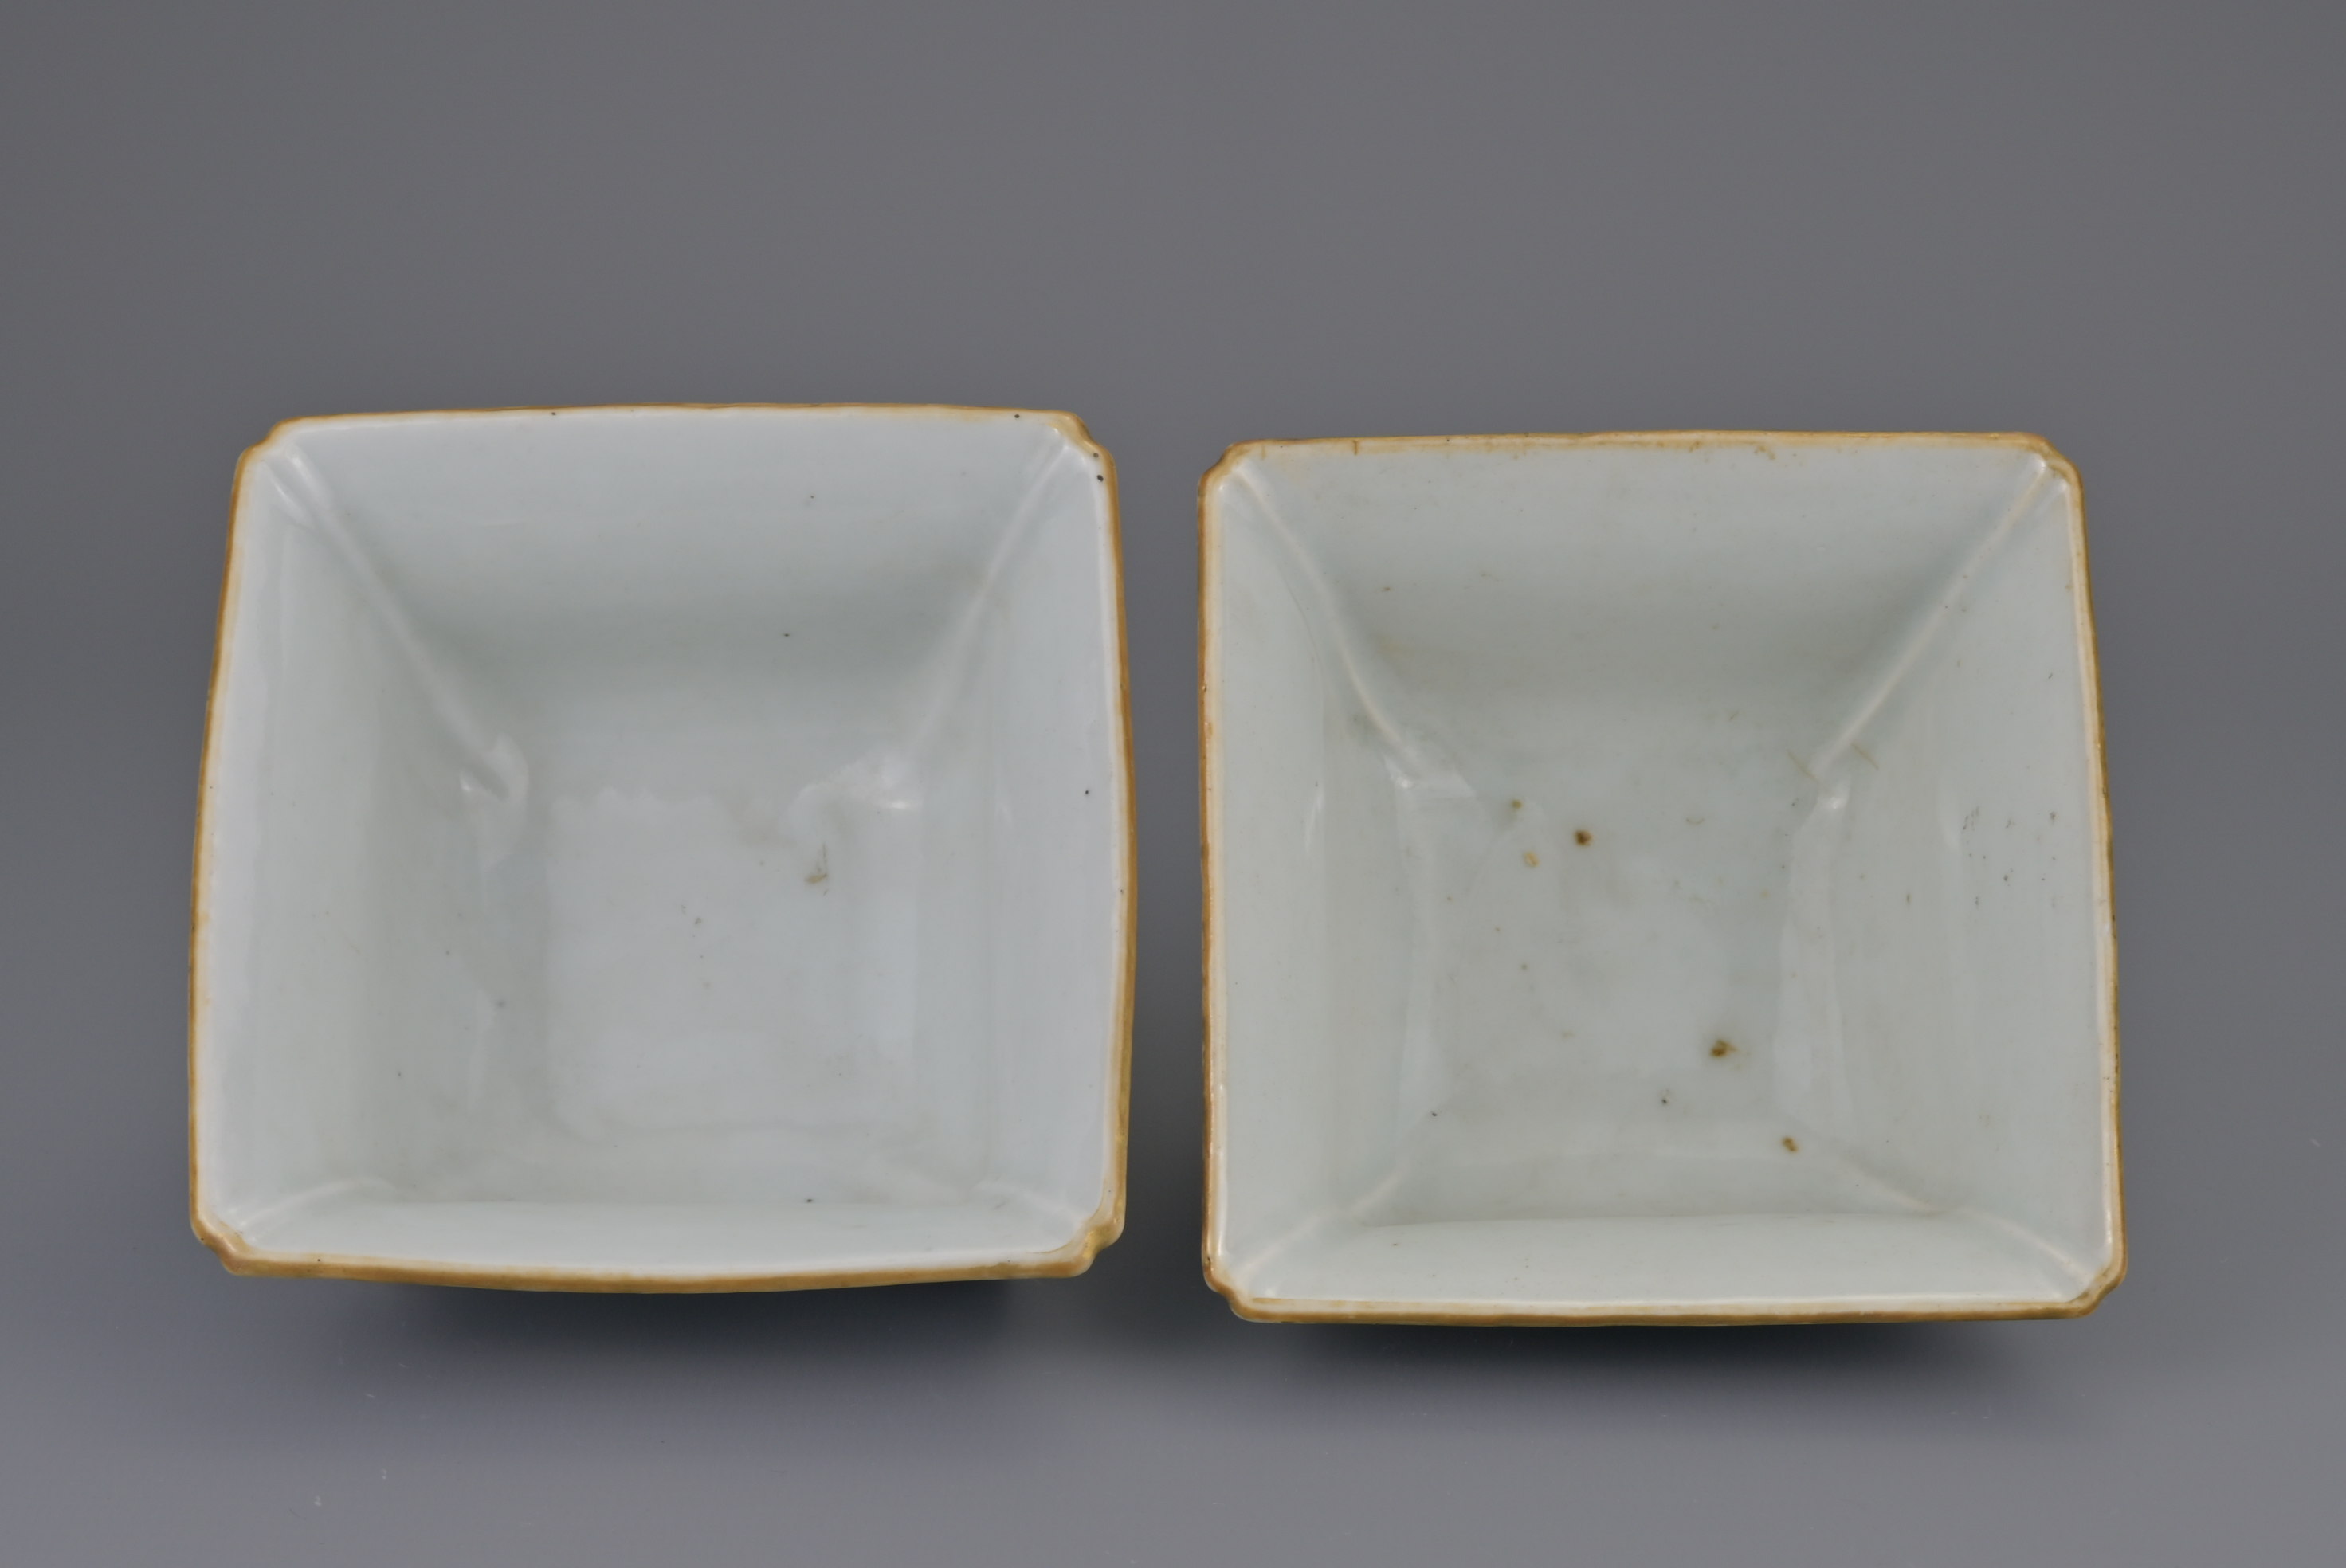 PAIR OF CHINESE BLUE AND WHITE PORCELAIN BOWLS, DAOGUANG MARK AND PERIOD, 19th CENTURY - Image 8 of 9